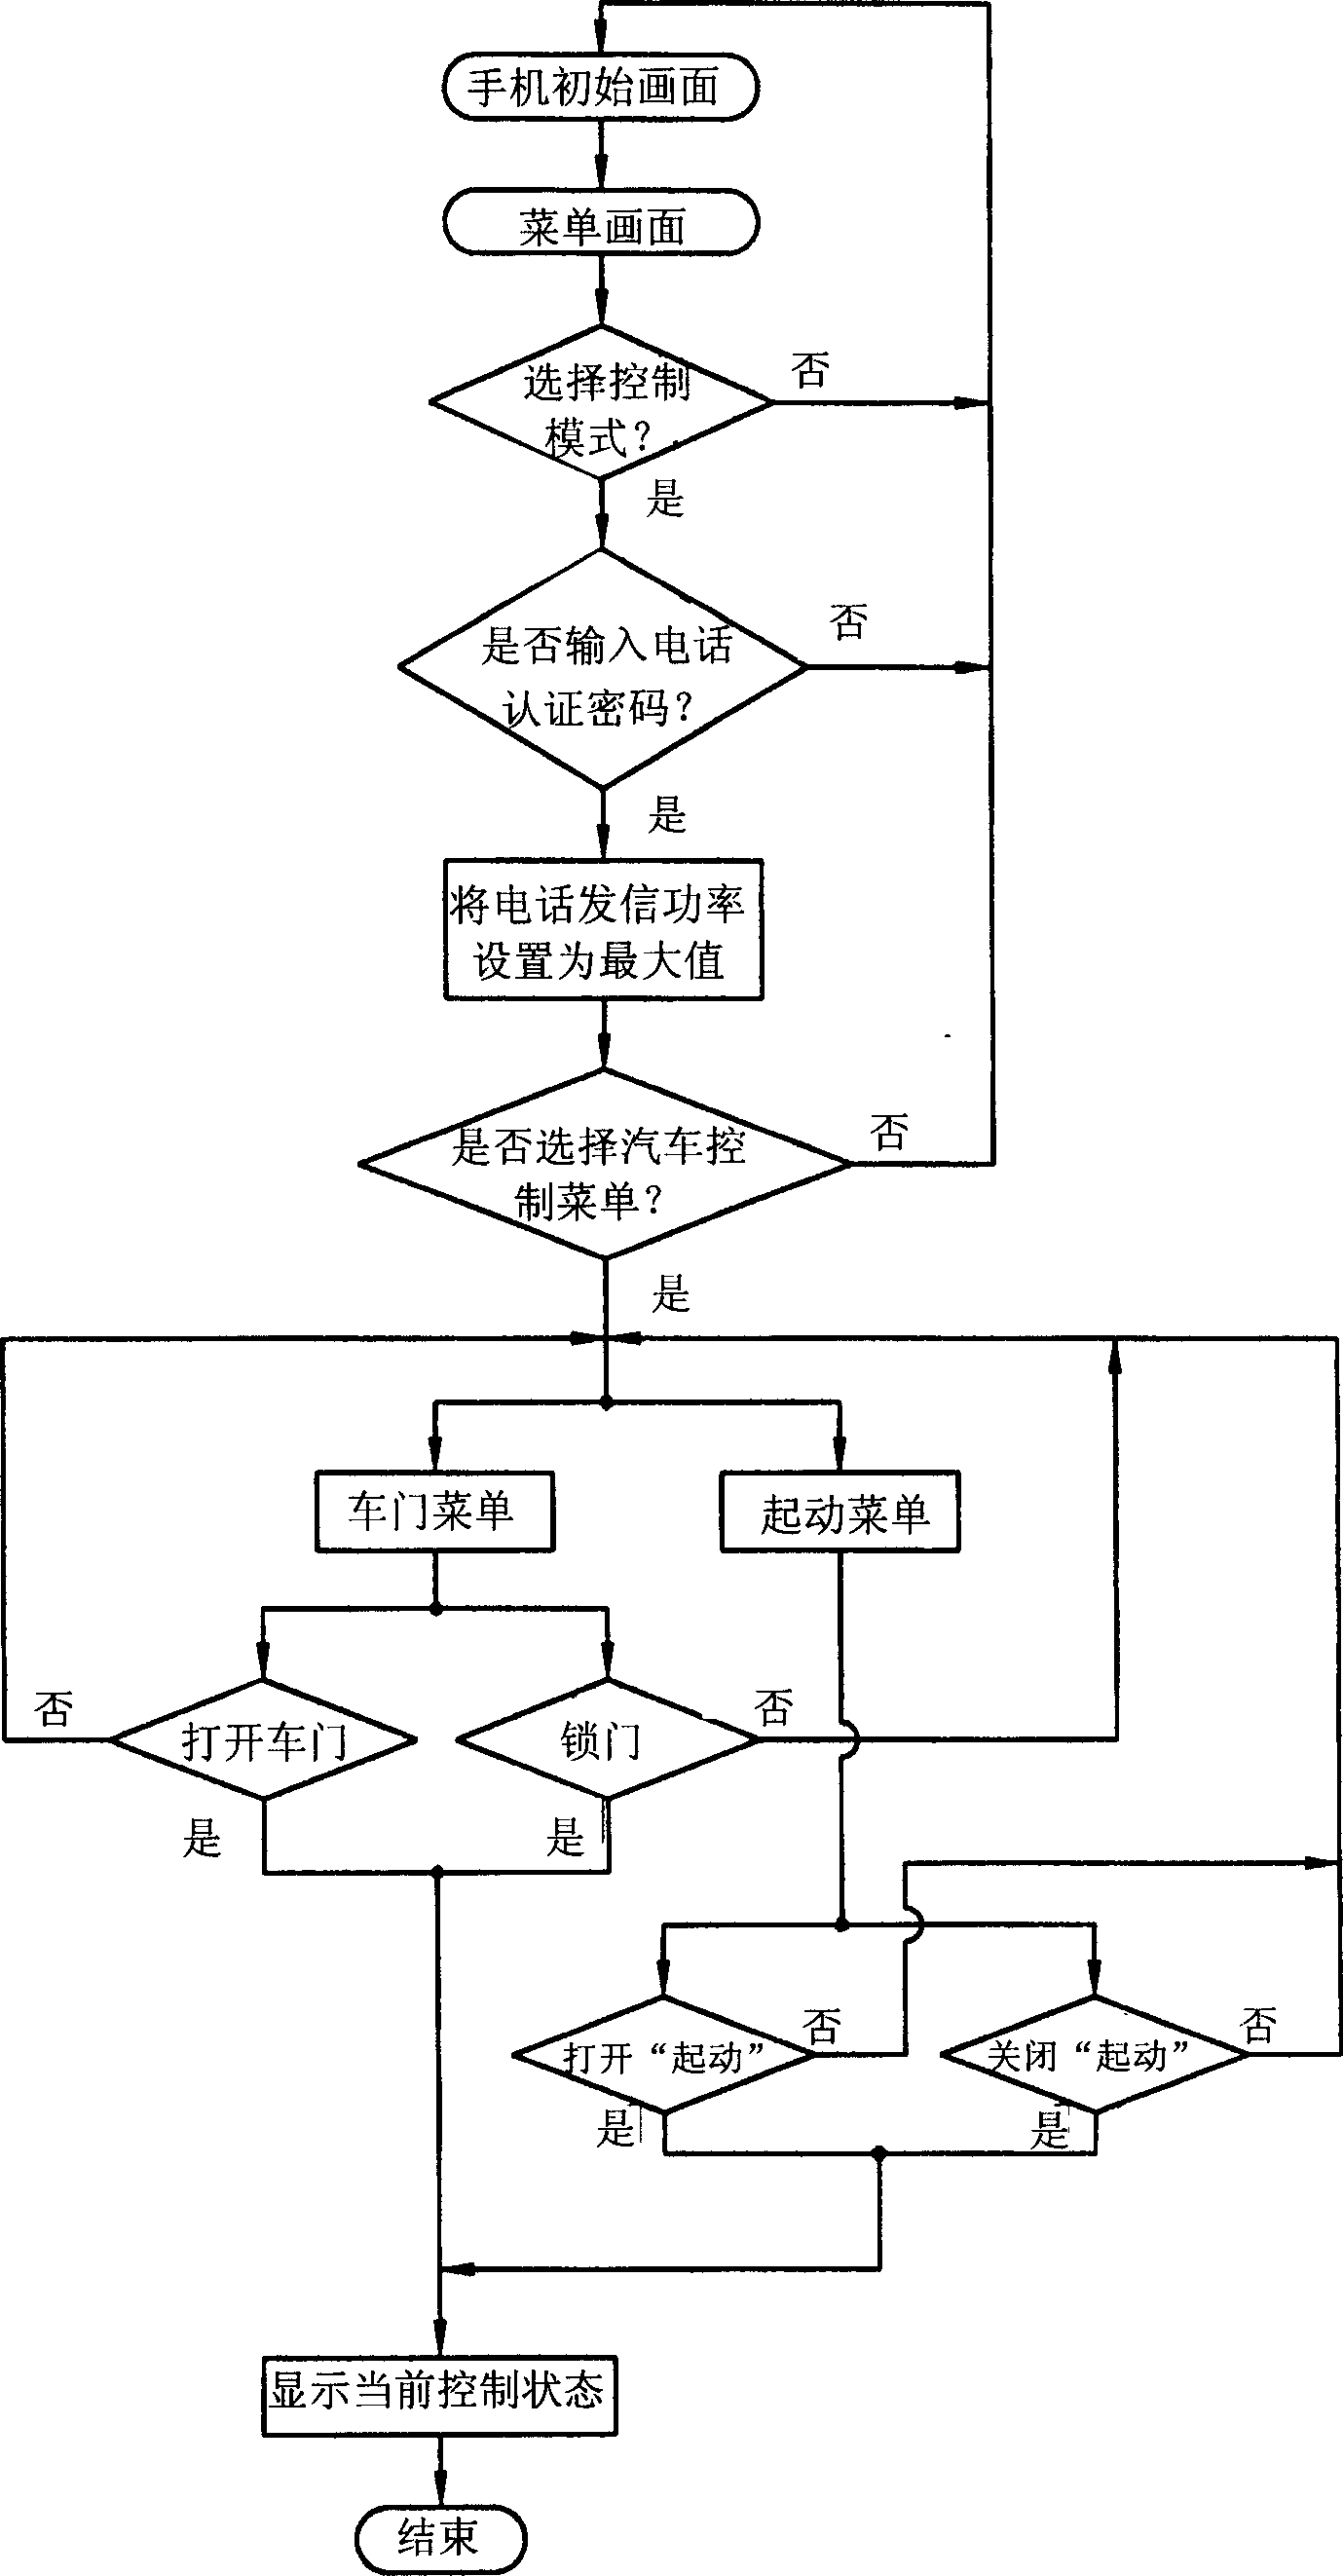 Remote control method of using mobile communication terminal